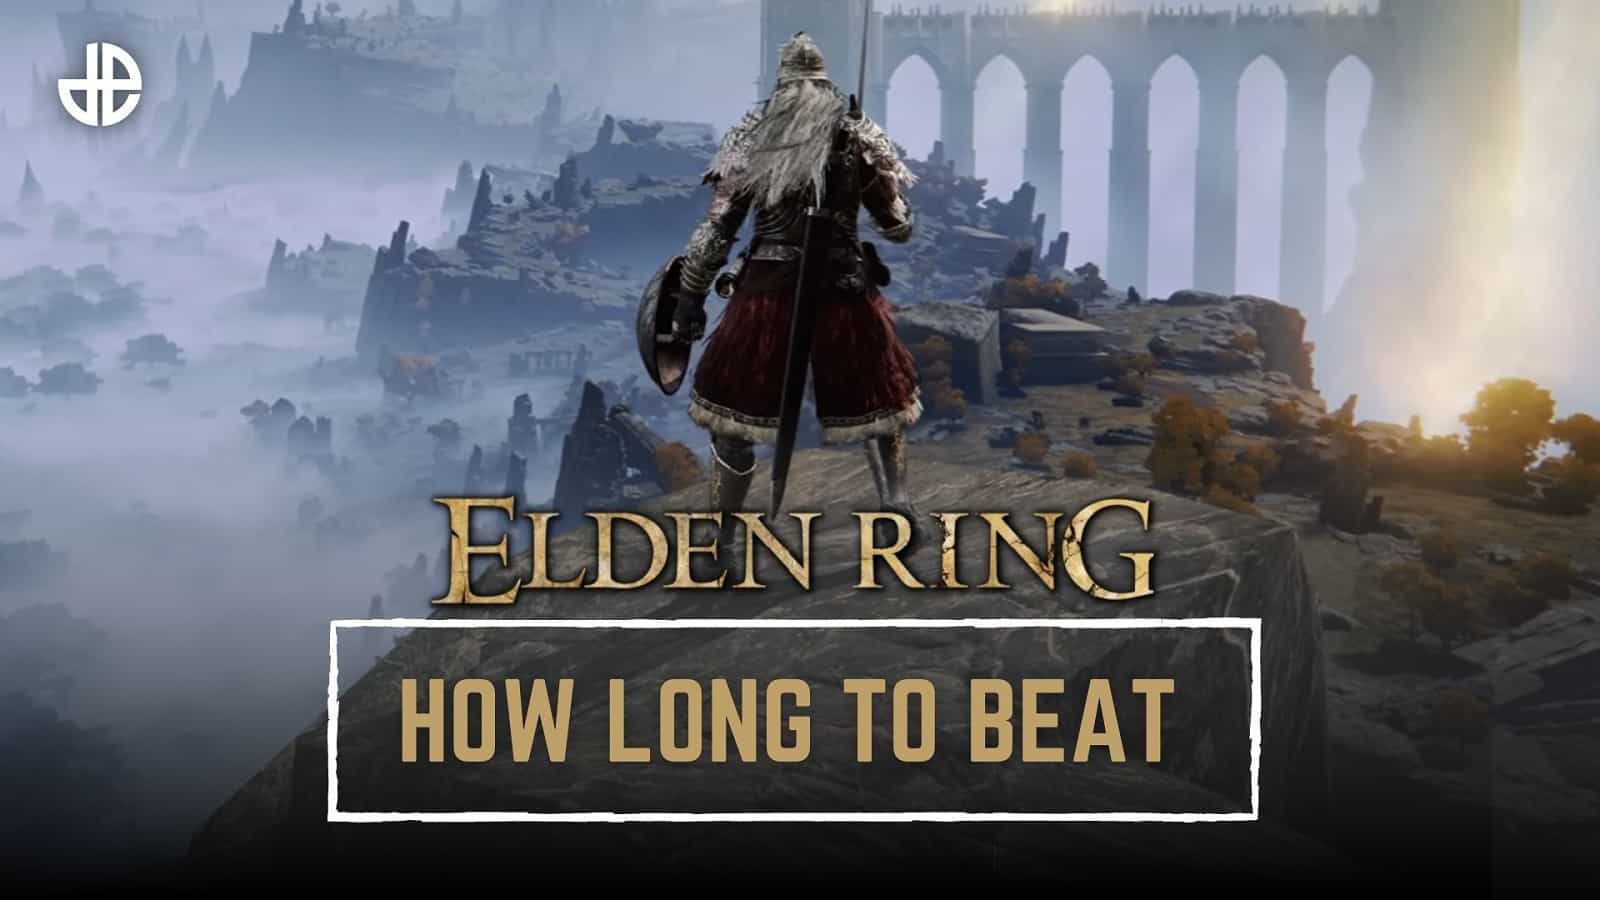 Game Length: How Long to Beat